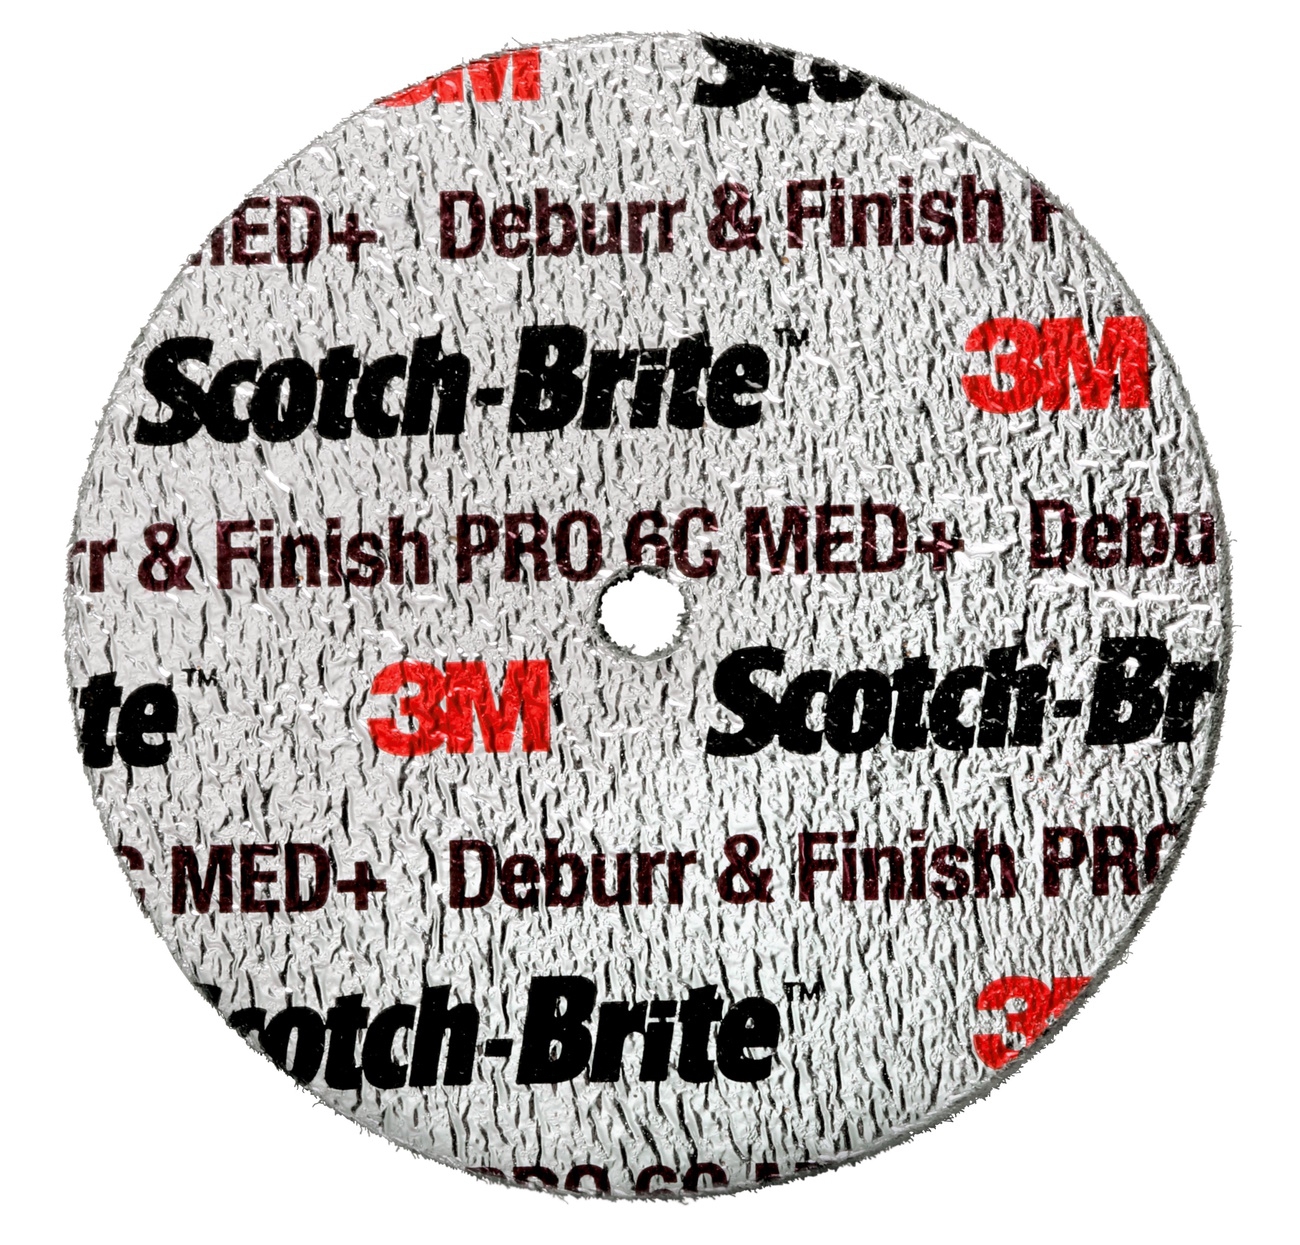  3M Scotch-Brite Deburr and Finish PRO Compact Disc DP-UW, 76 mm x 25.4 mm x 6.35 mm, 6C Med+, 10 WL